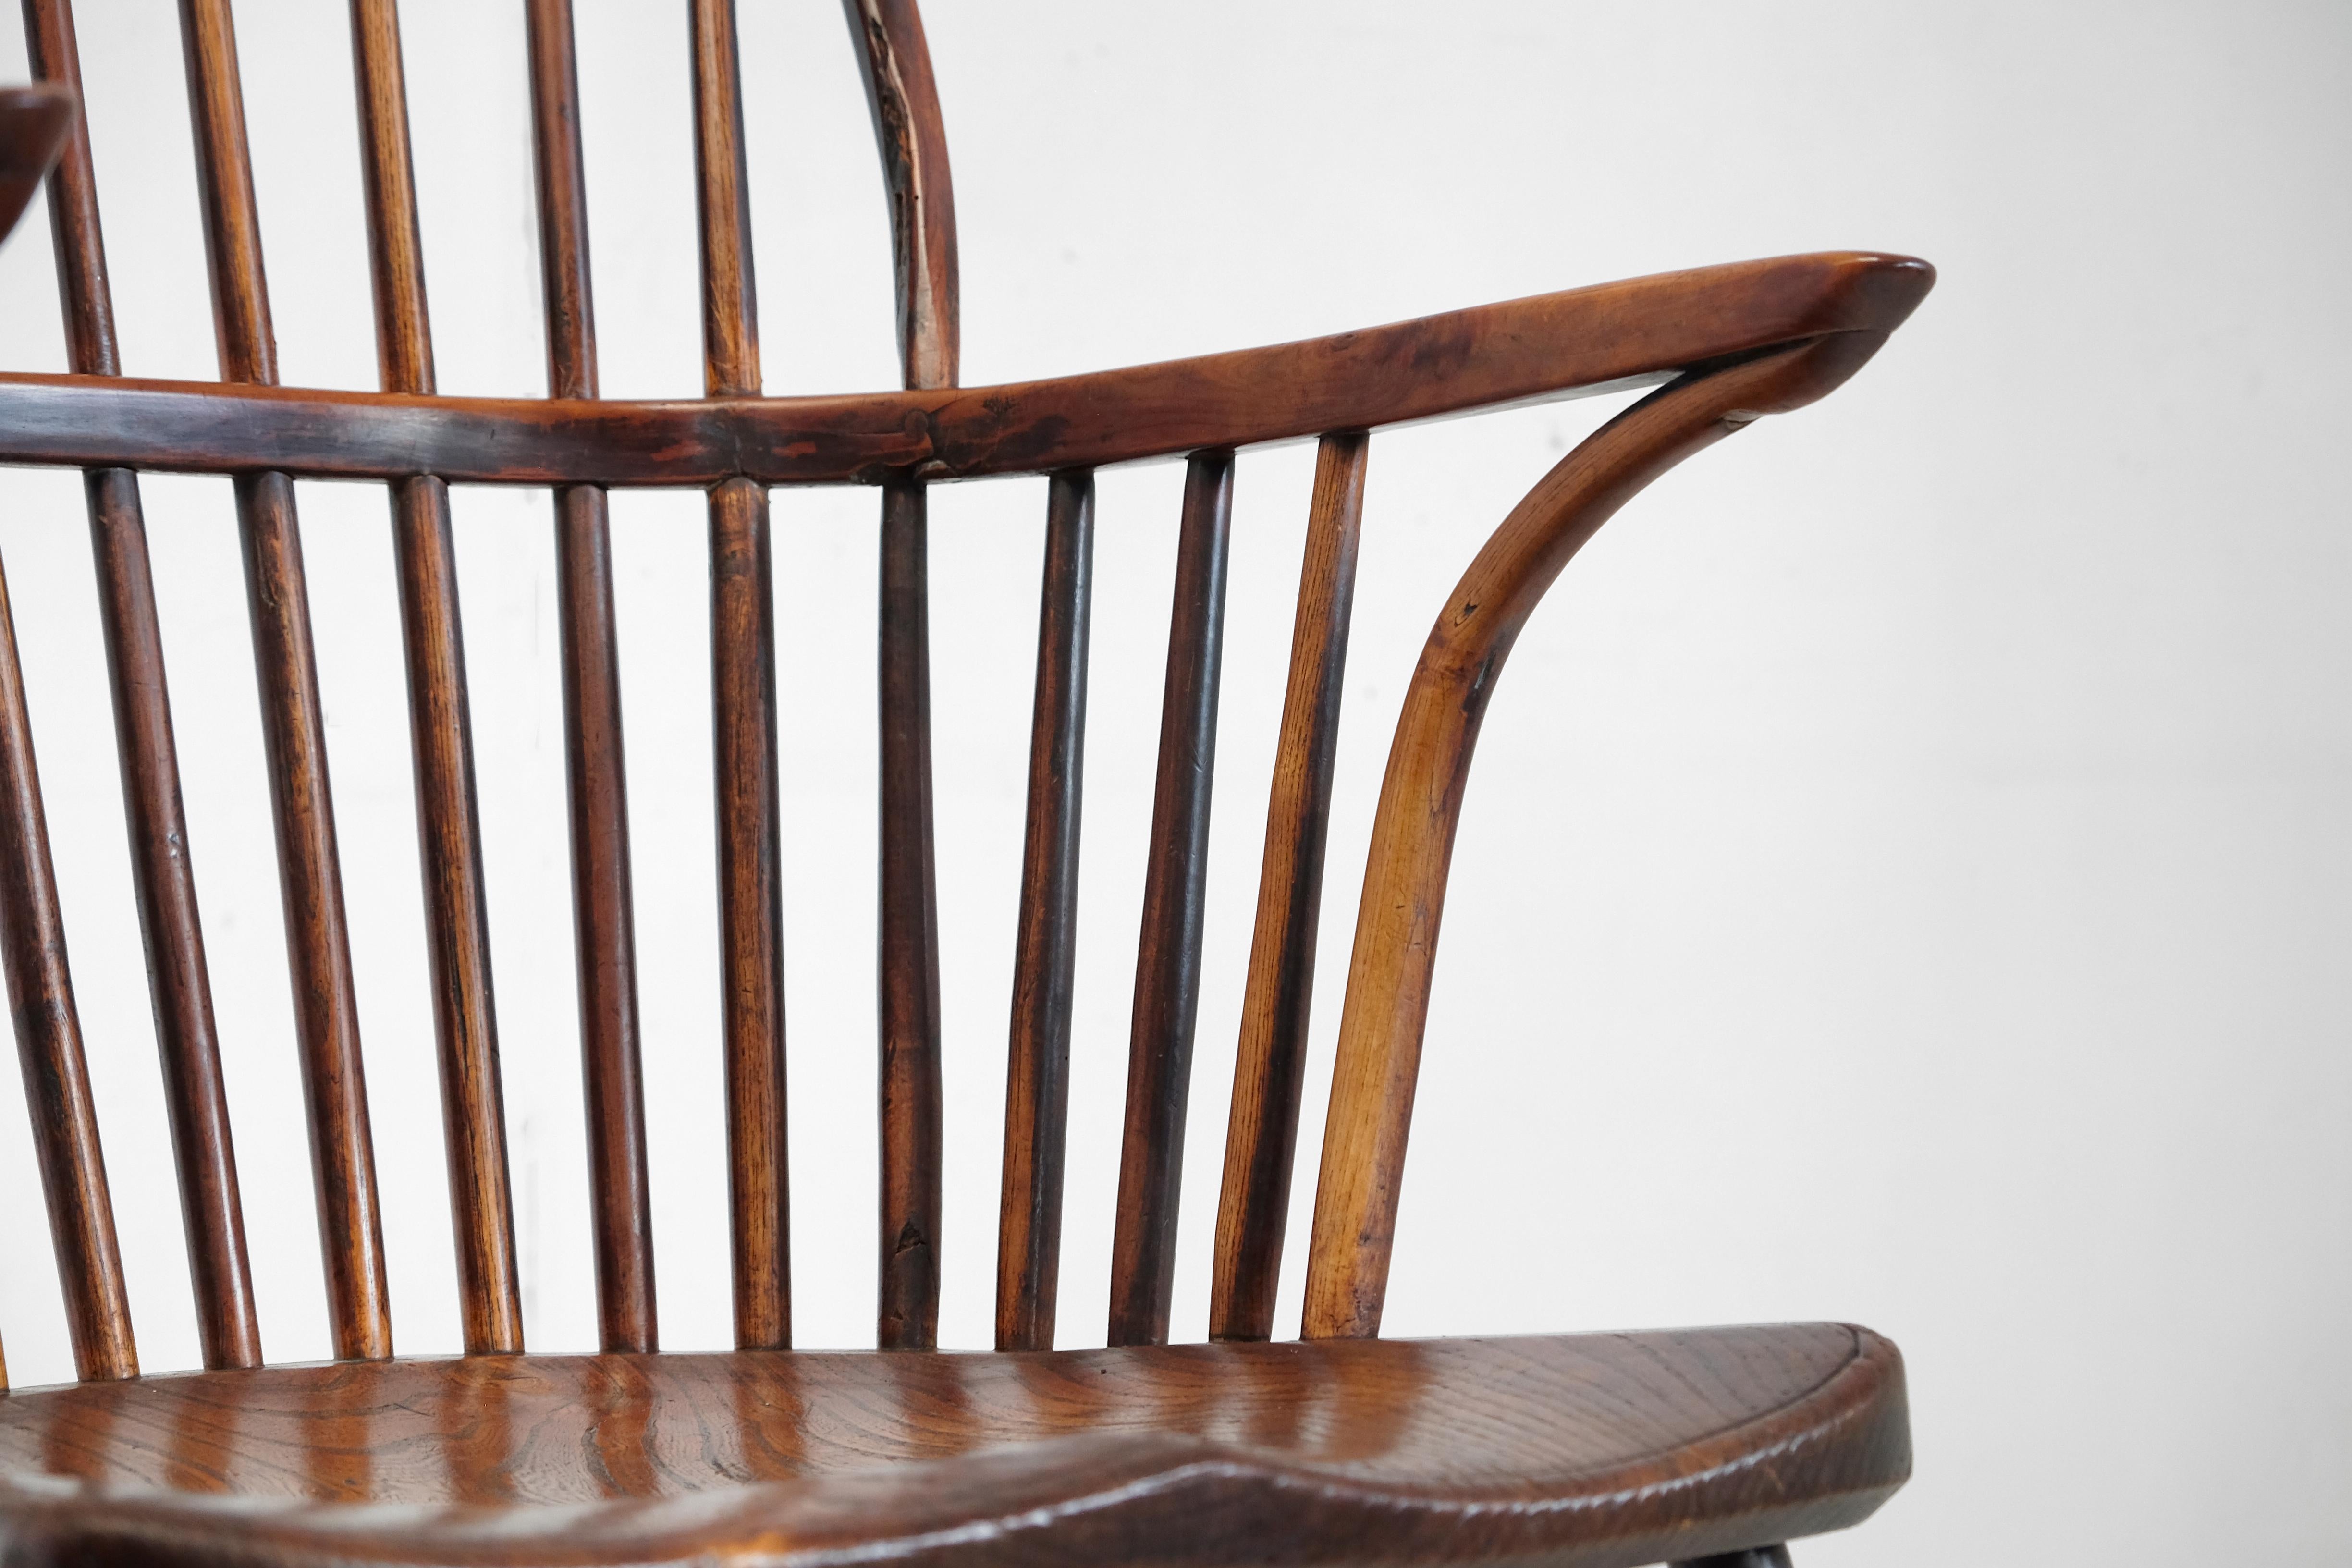 Mid-19th Century Yew Wood Stick Back, English Windsor Chair, 19th Century, Lincolnshire Hoop Back